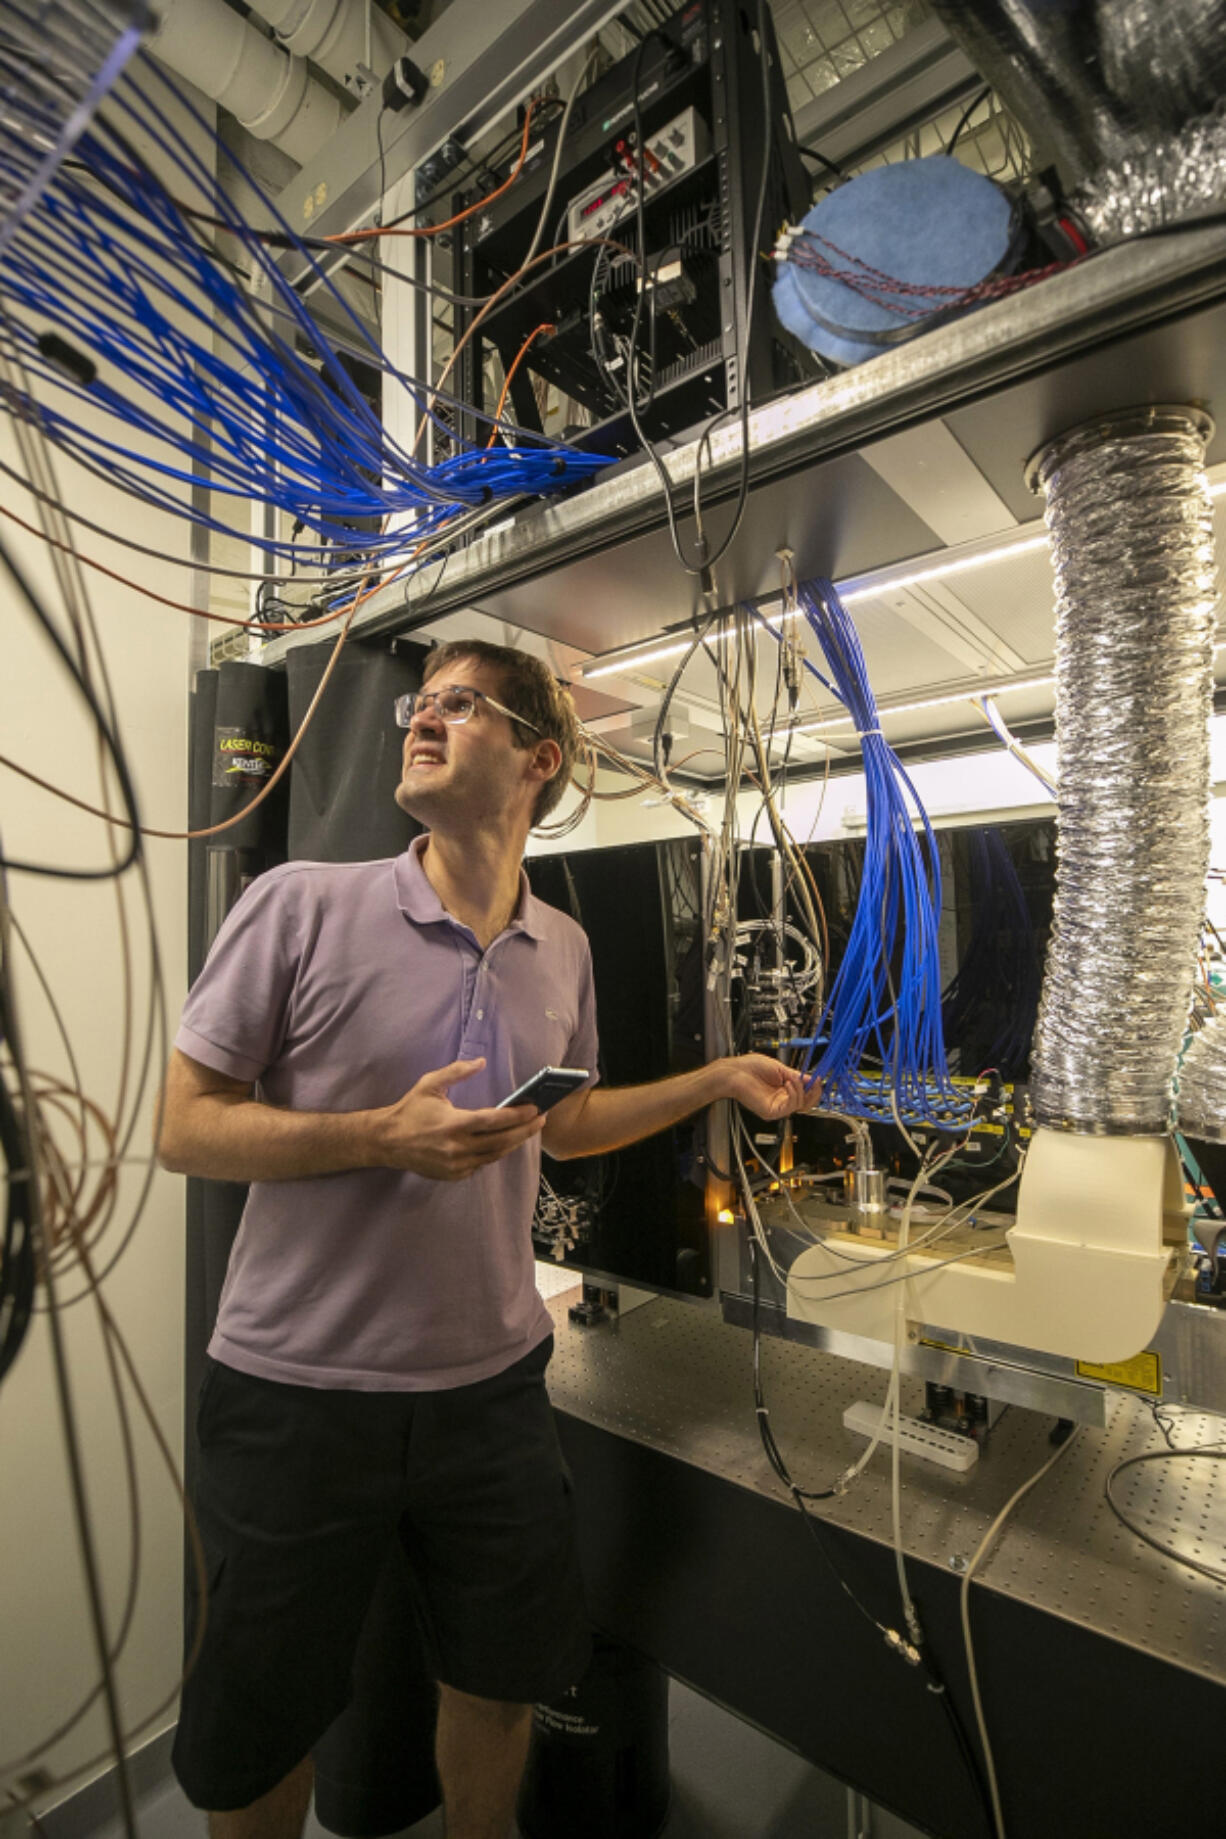 Marko Cetina, Duke assistant professor of Physics, works in the lab at the Duke Quantum Center on Aug. 30, 2022, in Durham, North Carolina. His research is focused on increasing complex quantum algorithms with increased numbers of quantum bits.